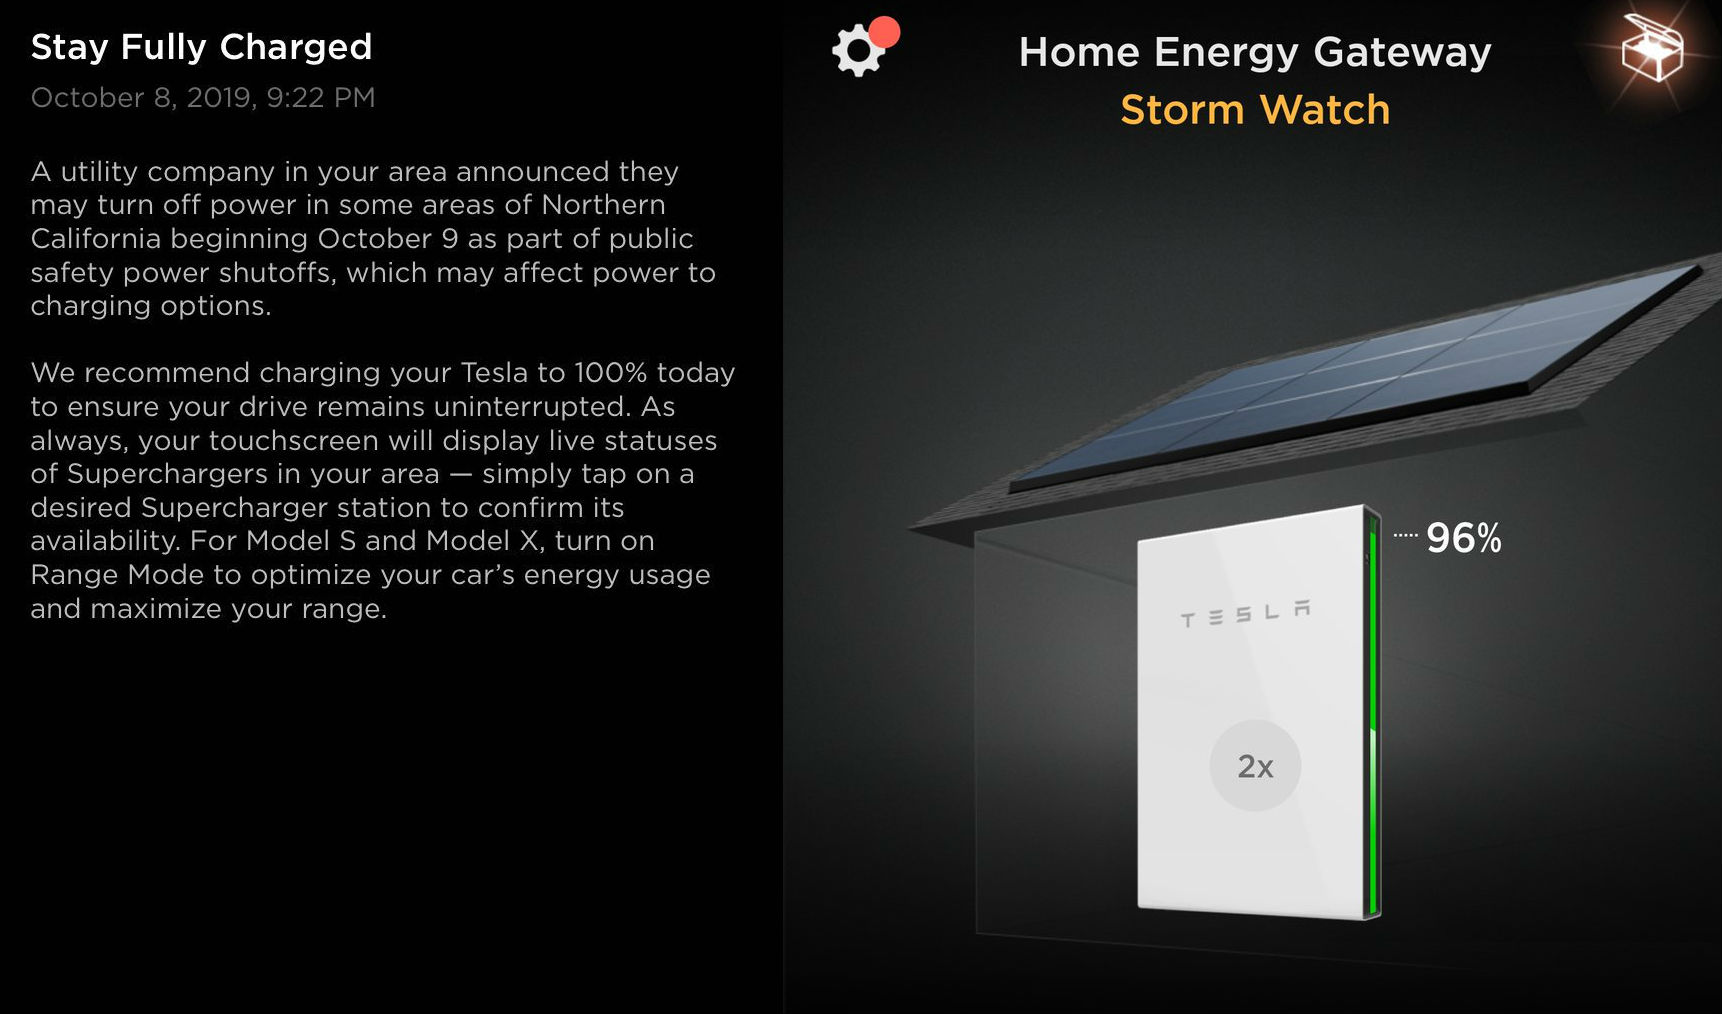 tesla-pge-power-outages